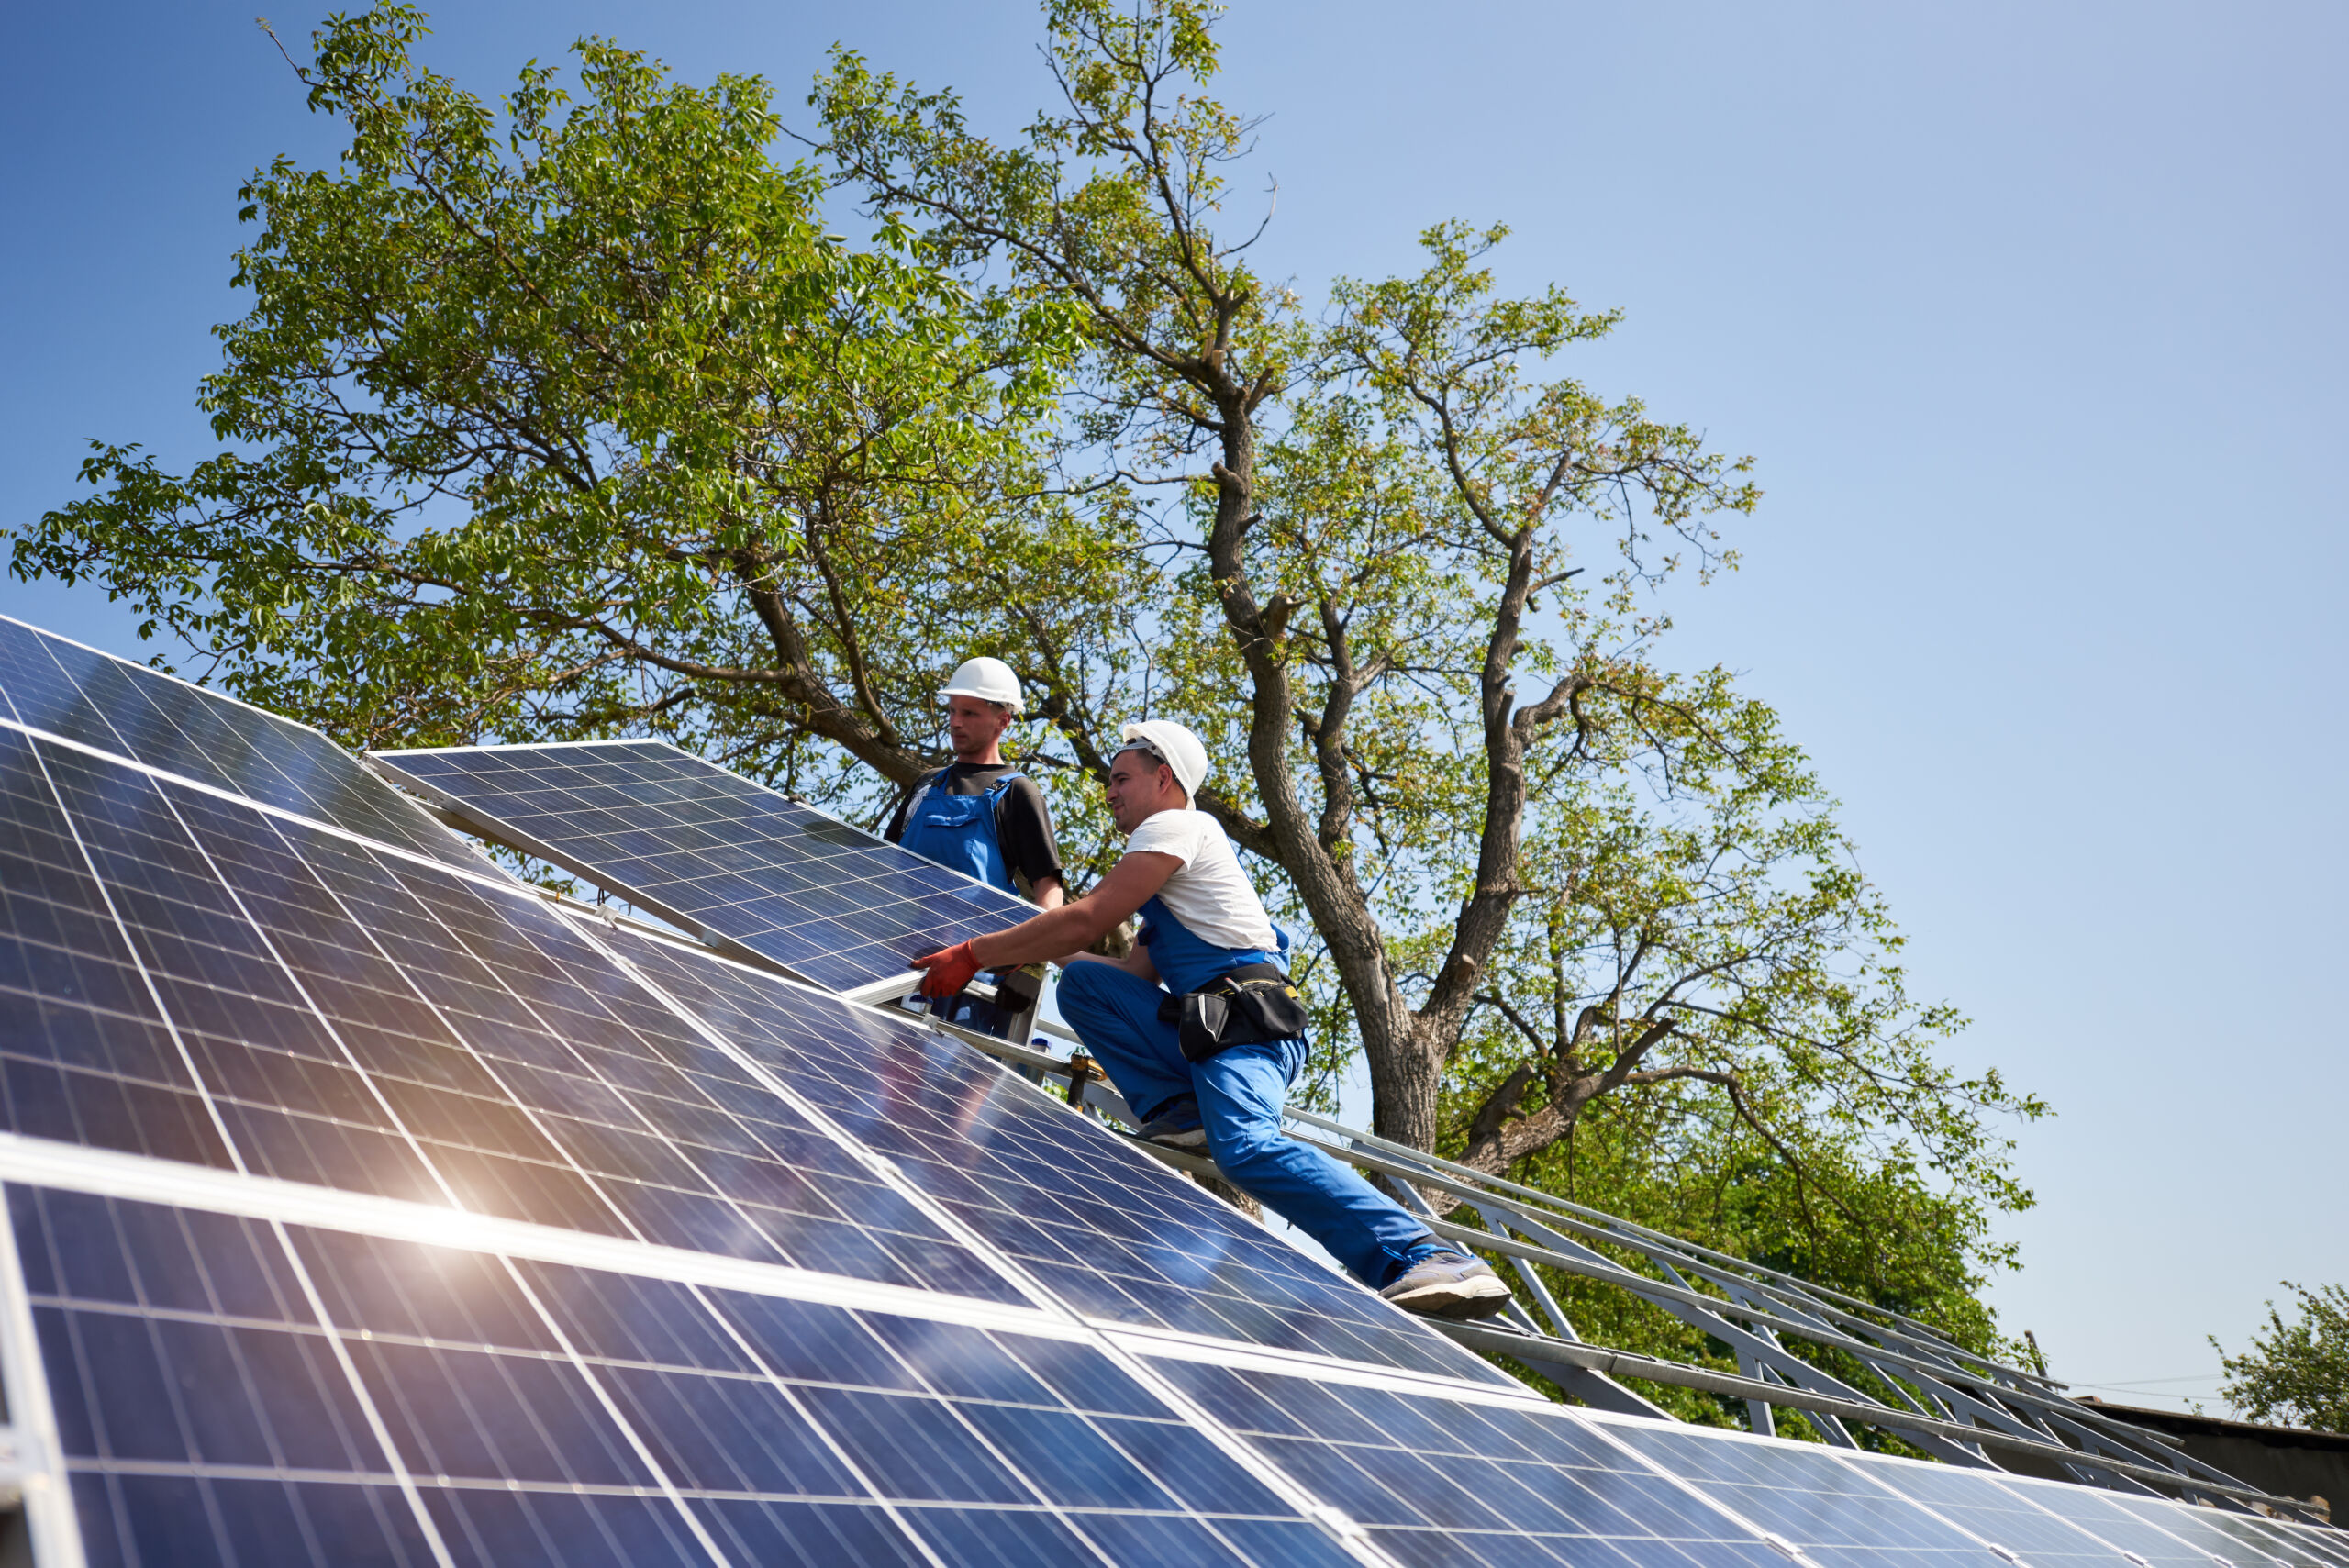 Two workers installing solar panels, with a blue sky and green tree in the background.